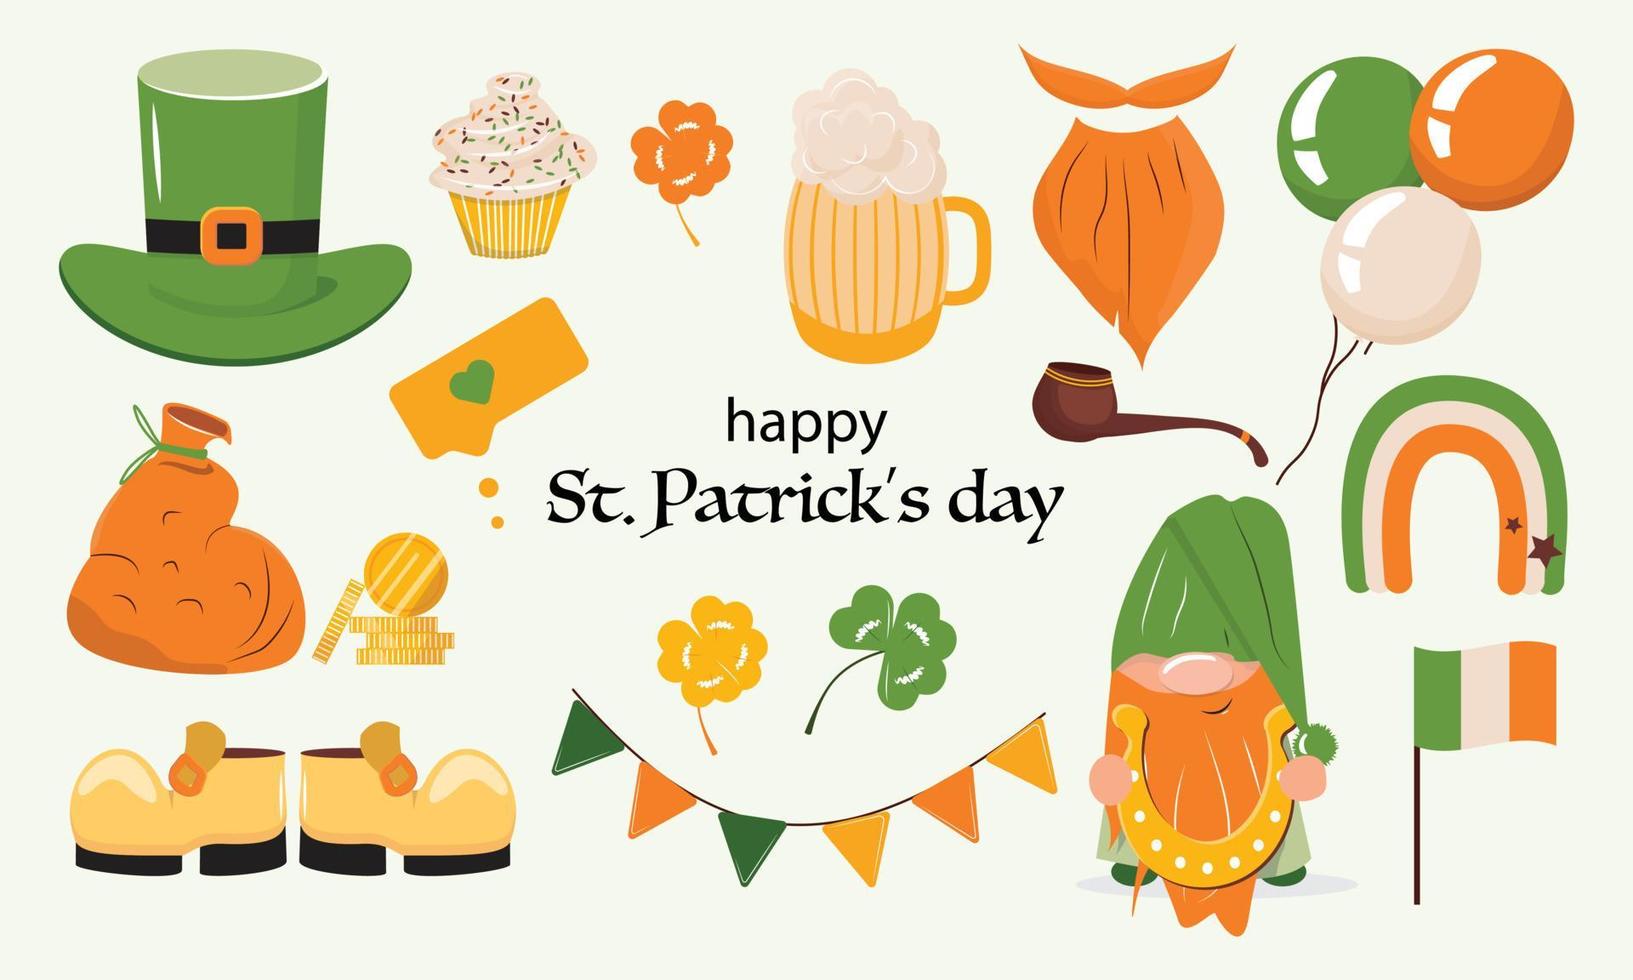 Collection of St. Patrick's day design elements. Set of items for any cute projects to St. Patrick's day. vector